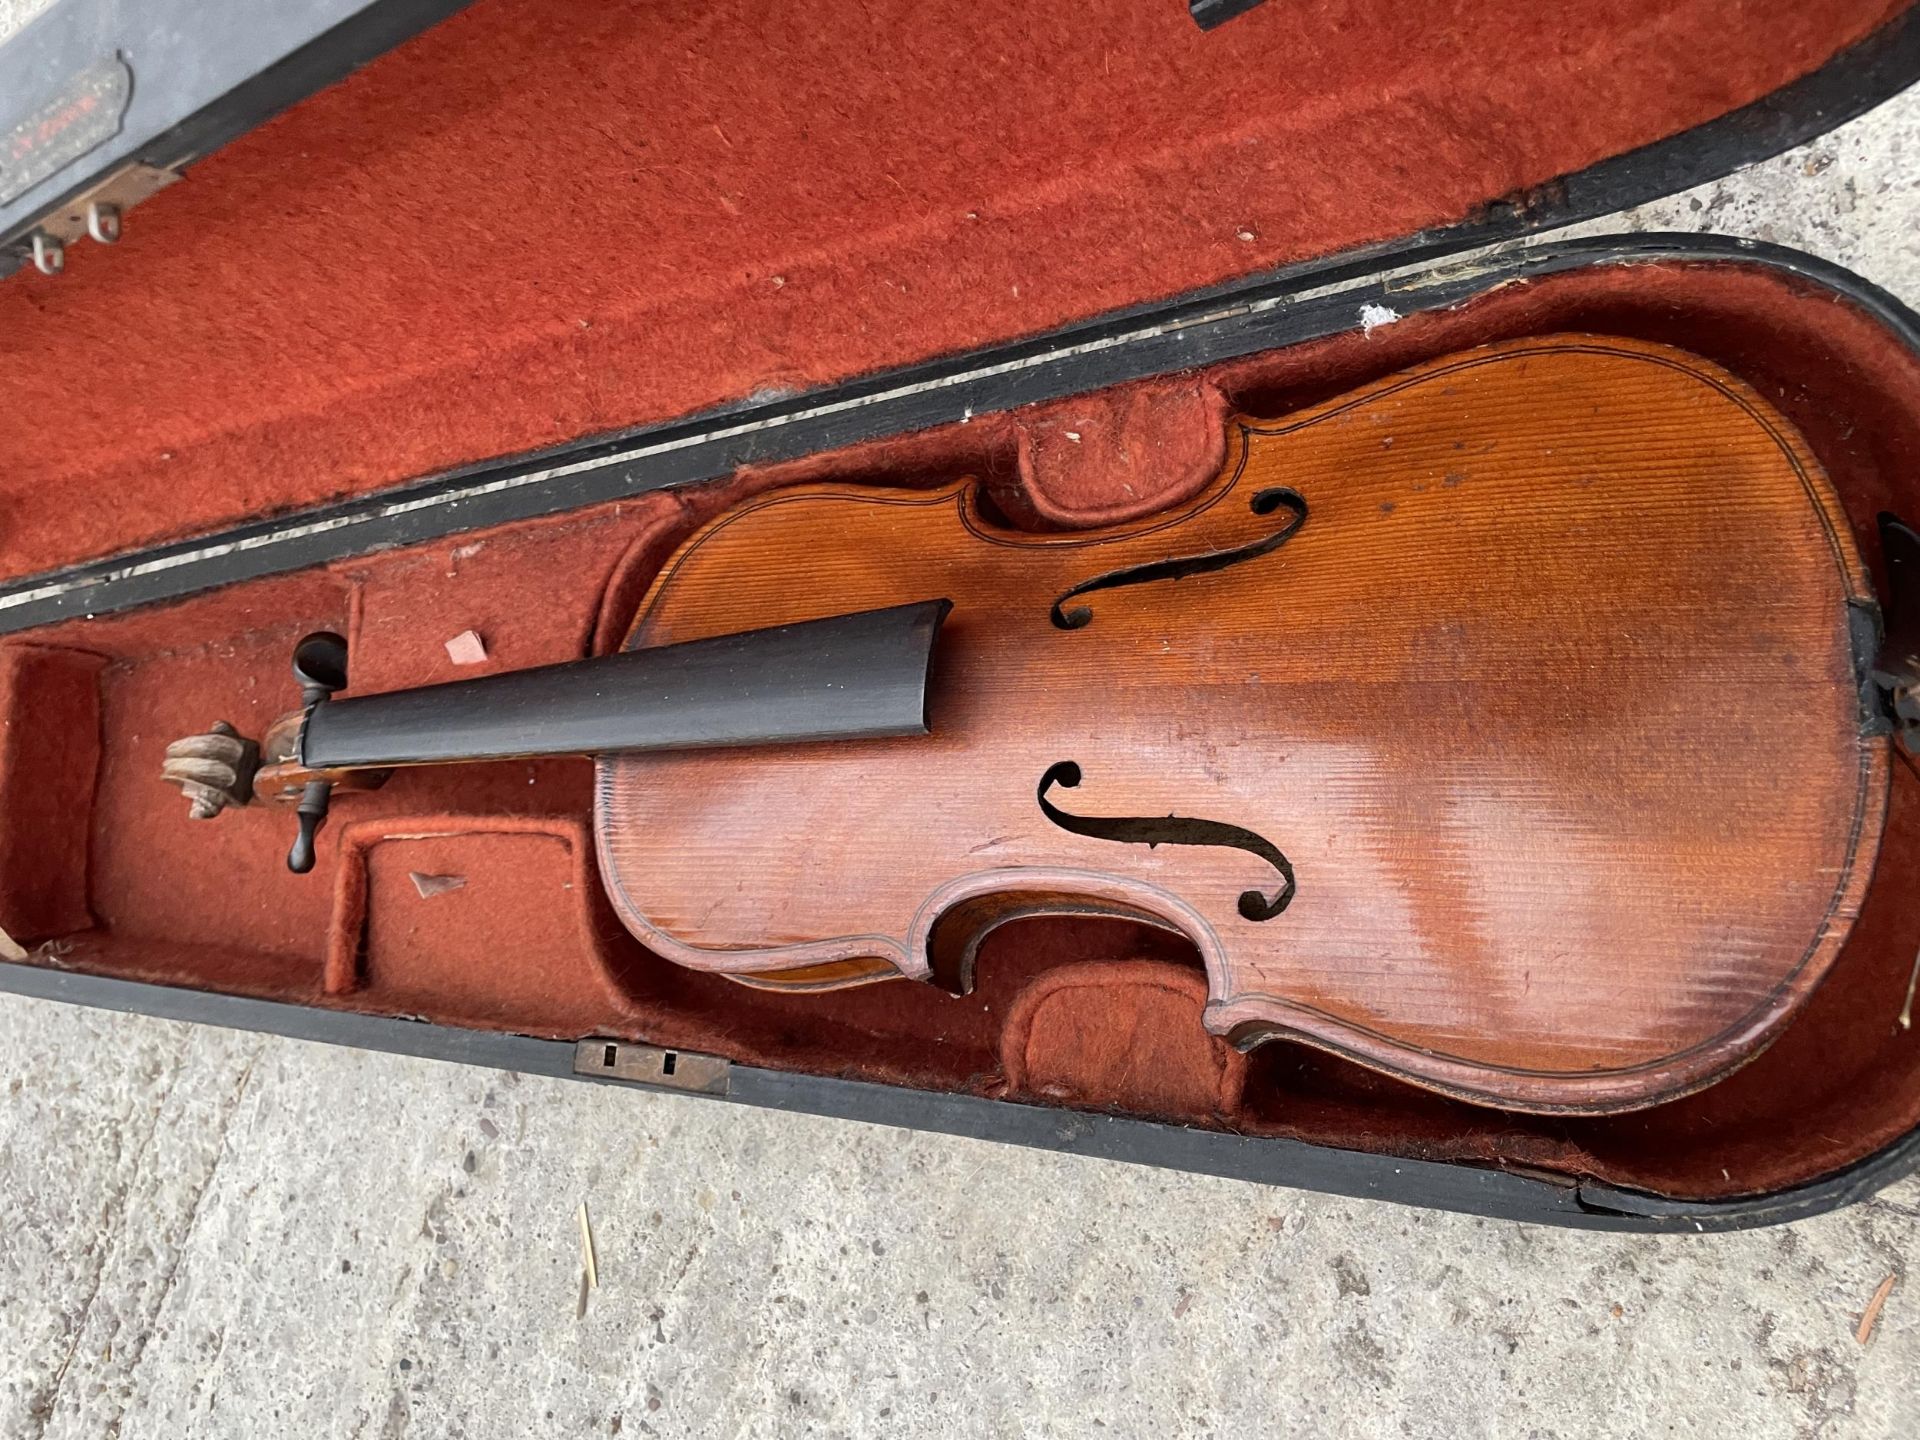 A WOODEN VIOLIN WITH CARRY CASE - Image 2 of 5